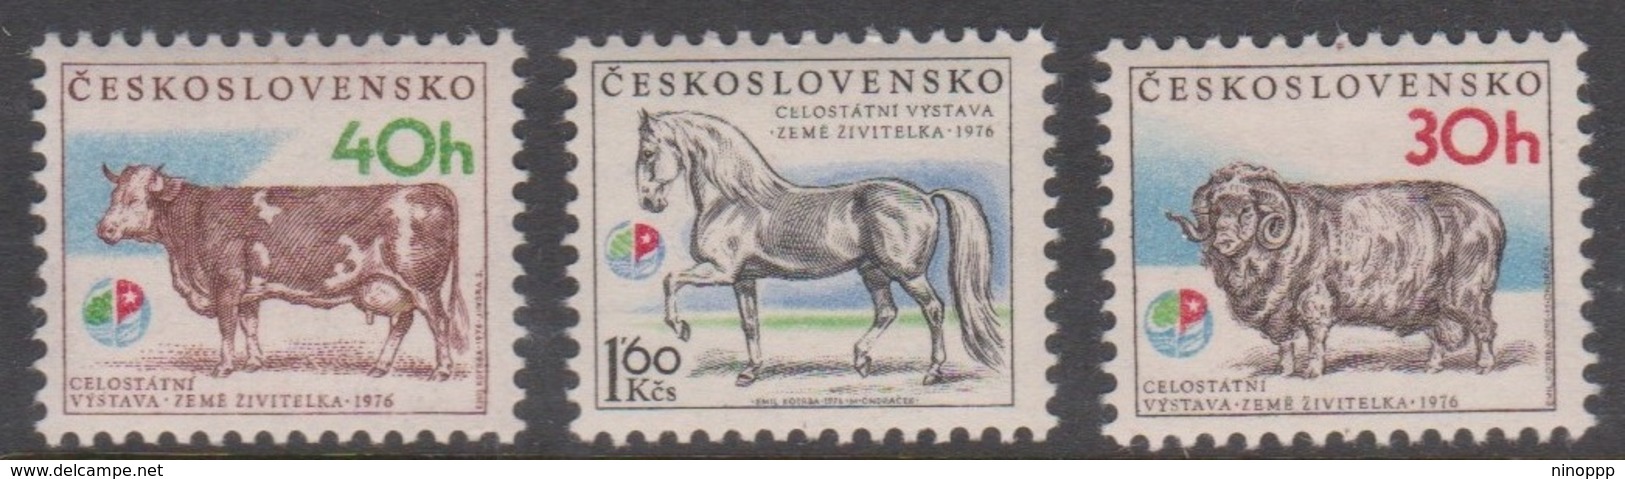 Czechoslovakia SG 2298-2300 1976 Agricultural Exhibition, Mint Never Hinged - Unused Stamps